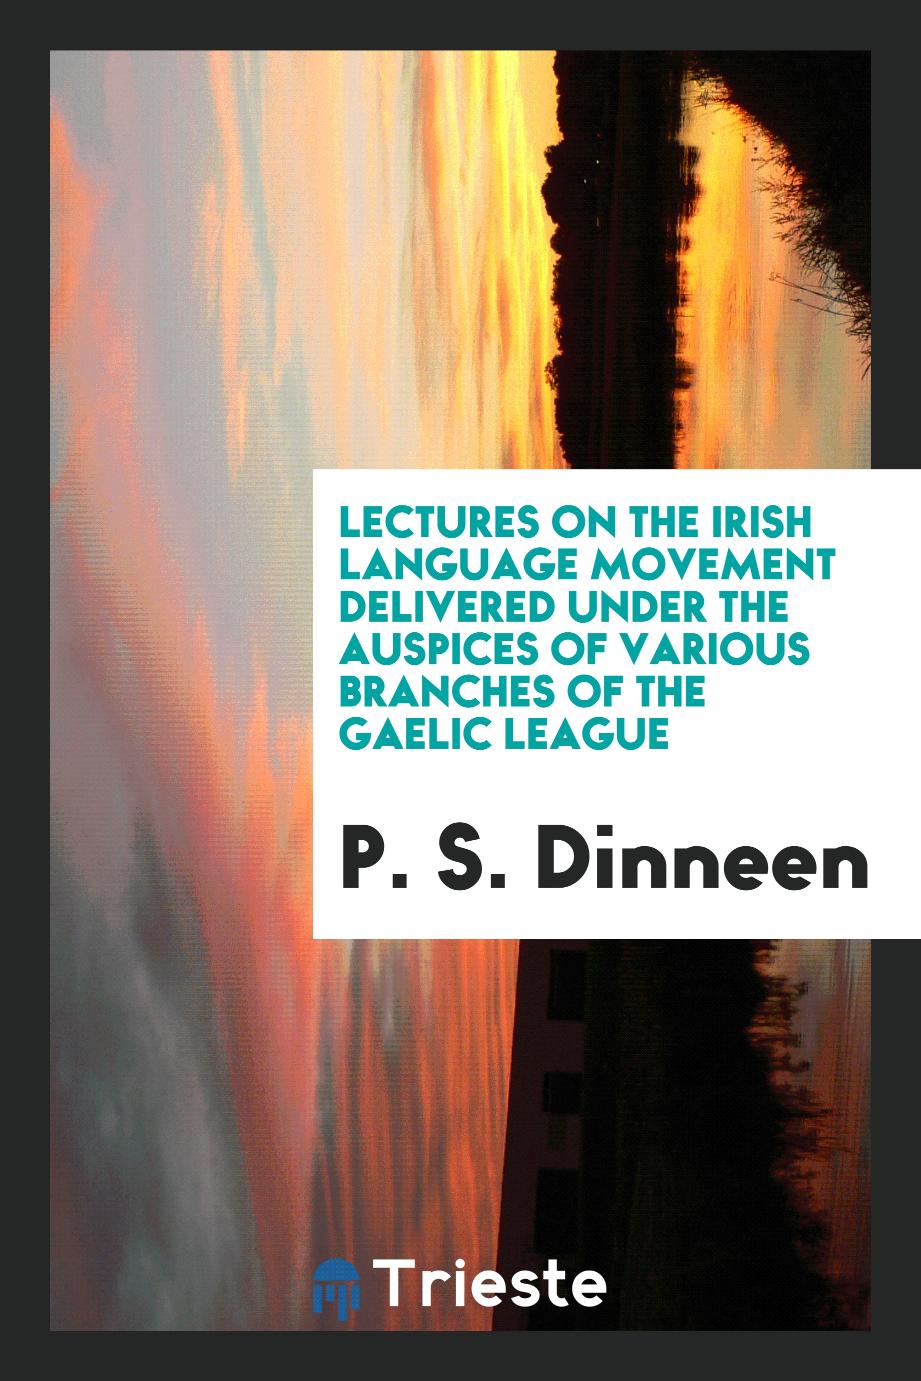 Lectures on the Irish language movement delivered under the auspices of various branches of the Gaelic League